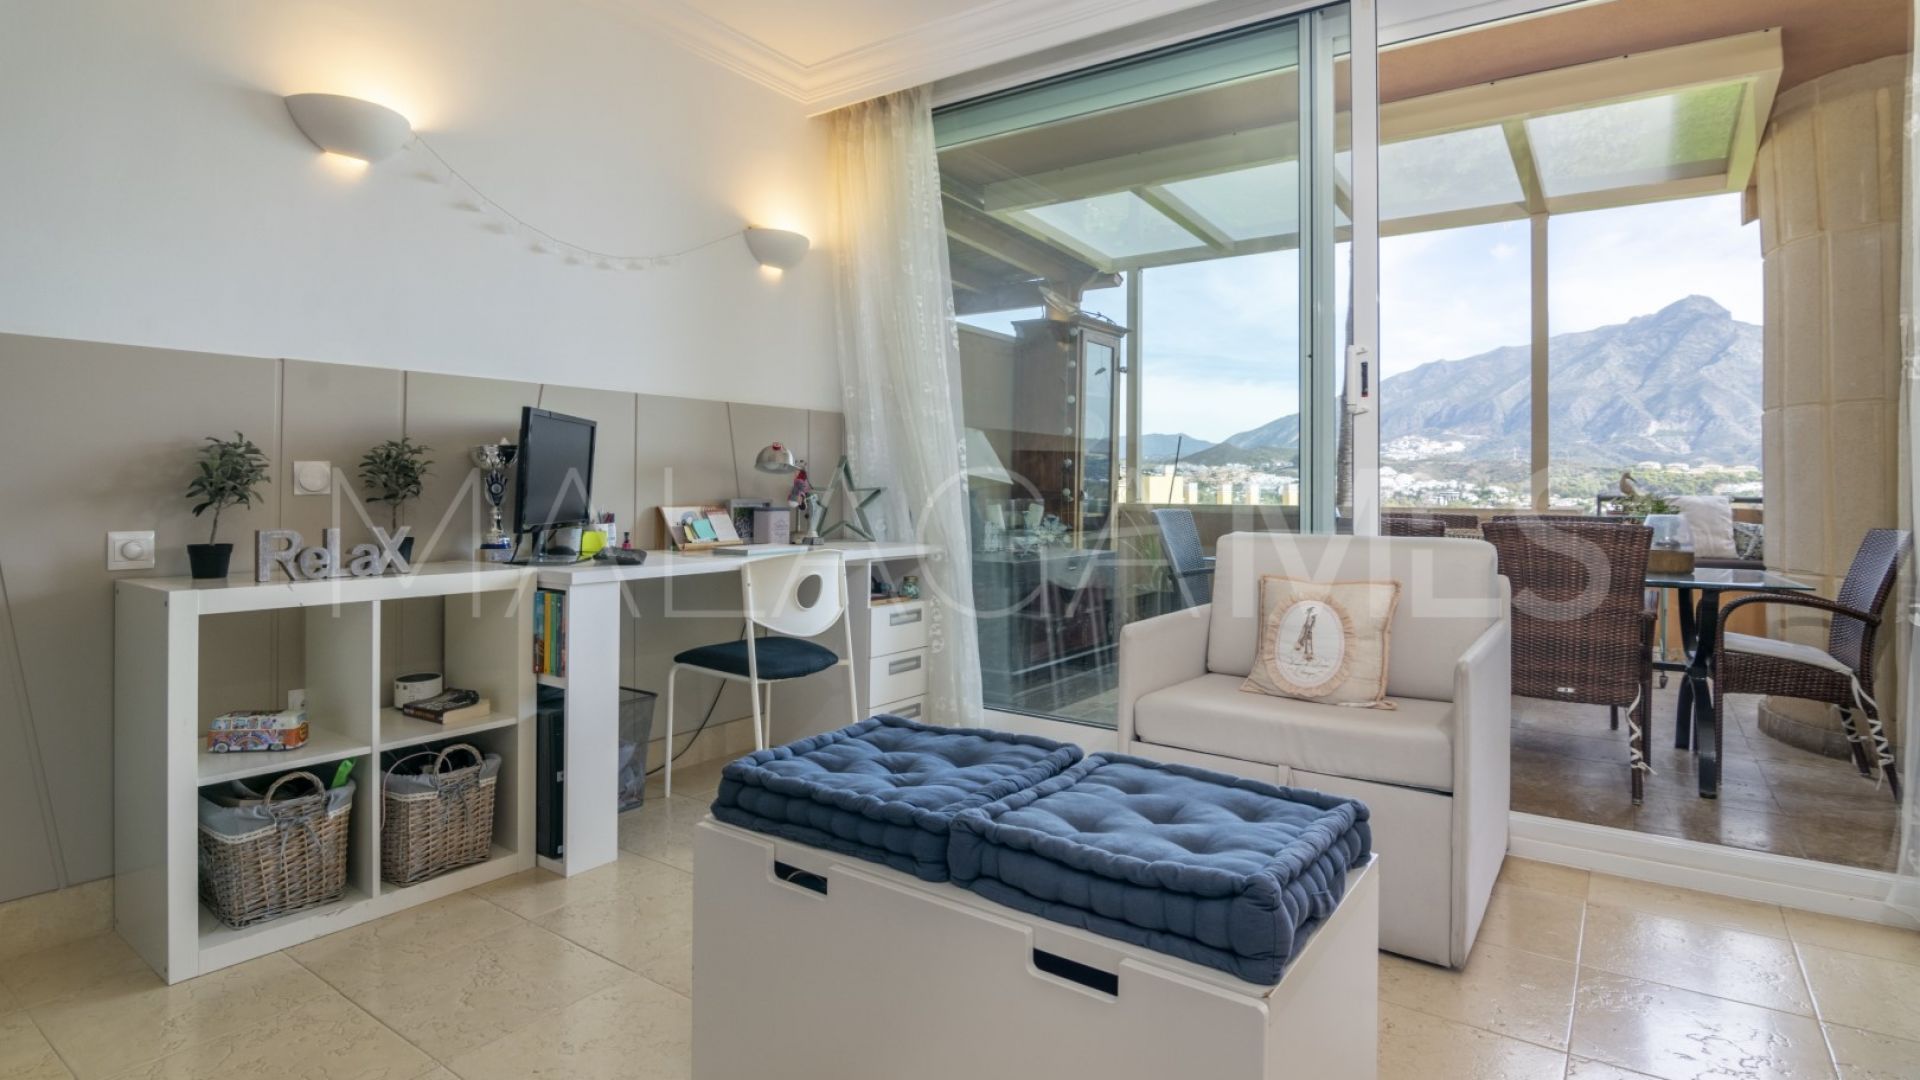 4 bedrooms apartment in Magna Marbella for sale